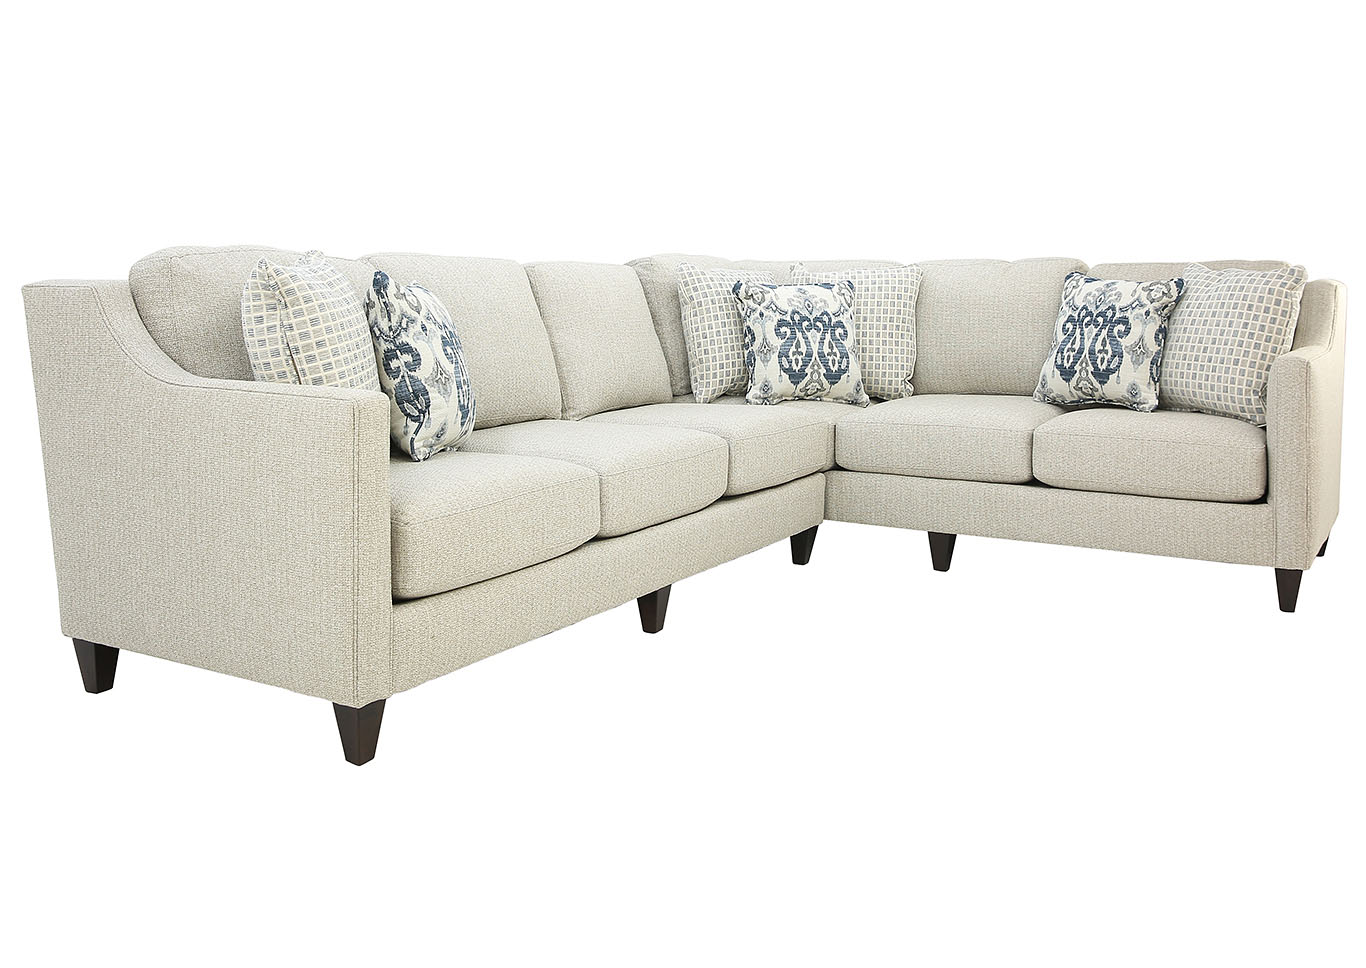 TWINE AND TWIG CHALK 2 PIECE SECTIONAL,MAYO FURNITURE